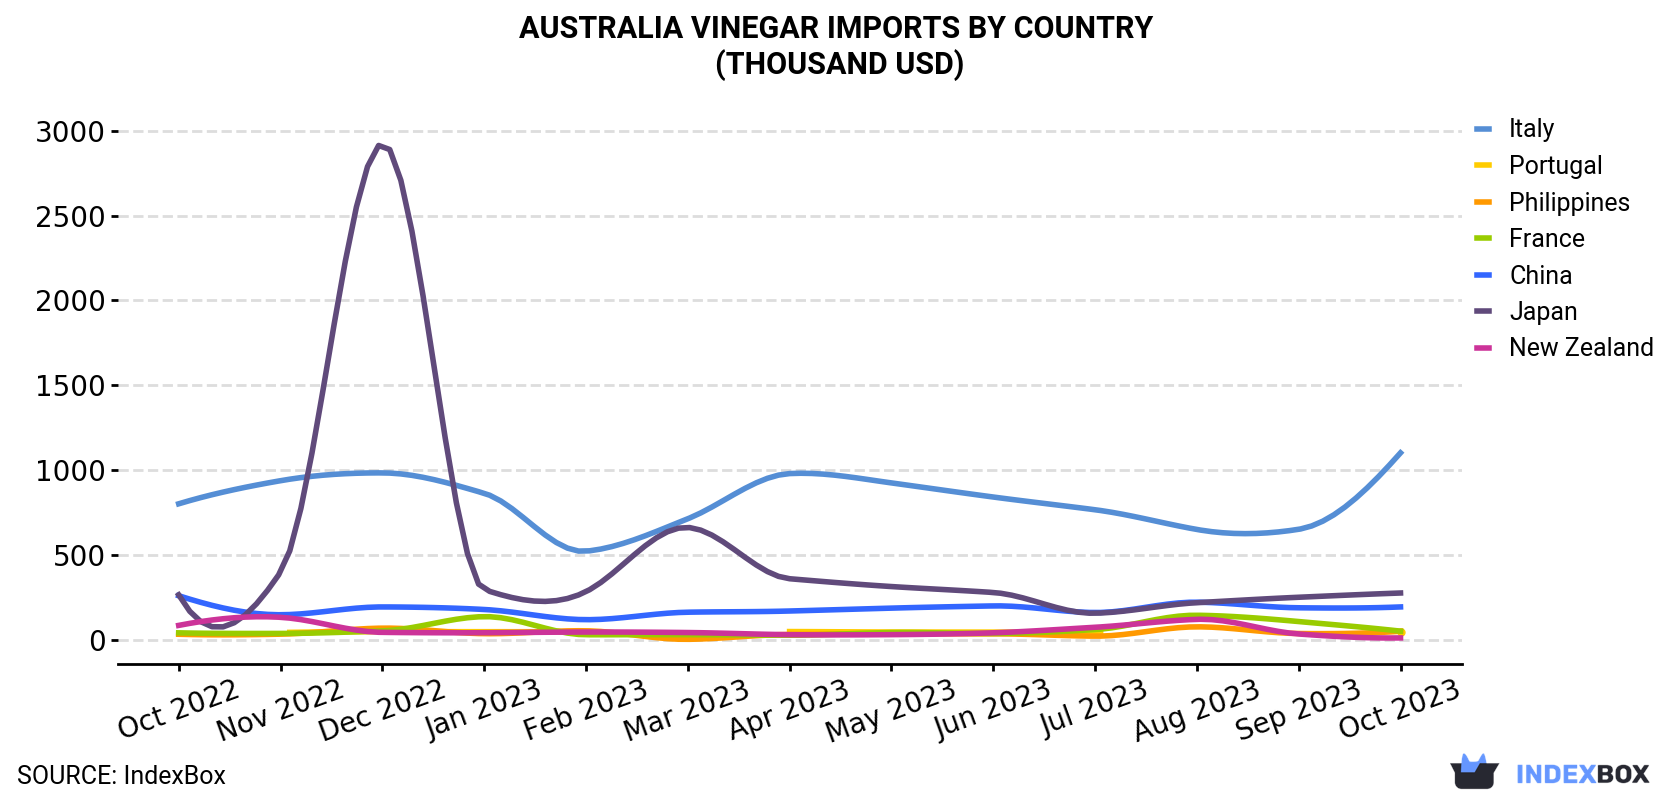 Australia Vinegar Imports By Country (Thousand USD)